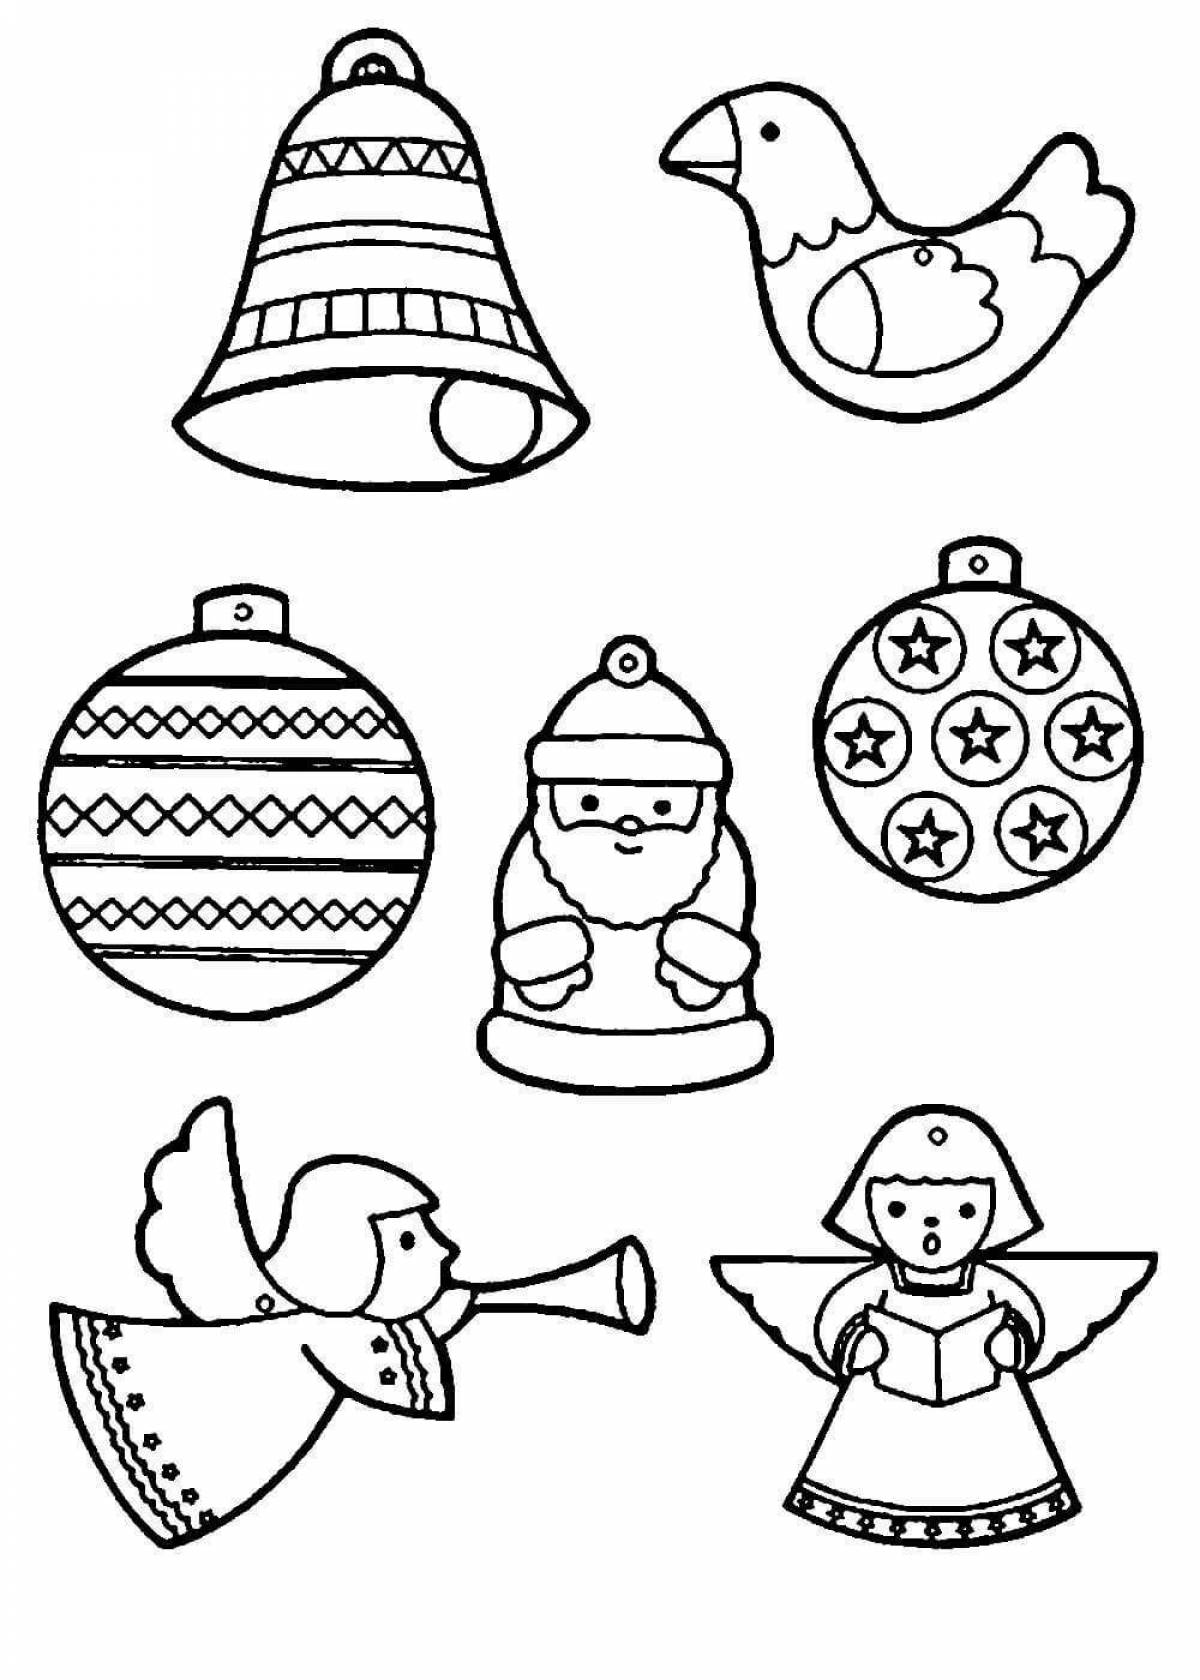 Majestic Christmas tree coloring page